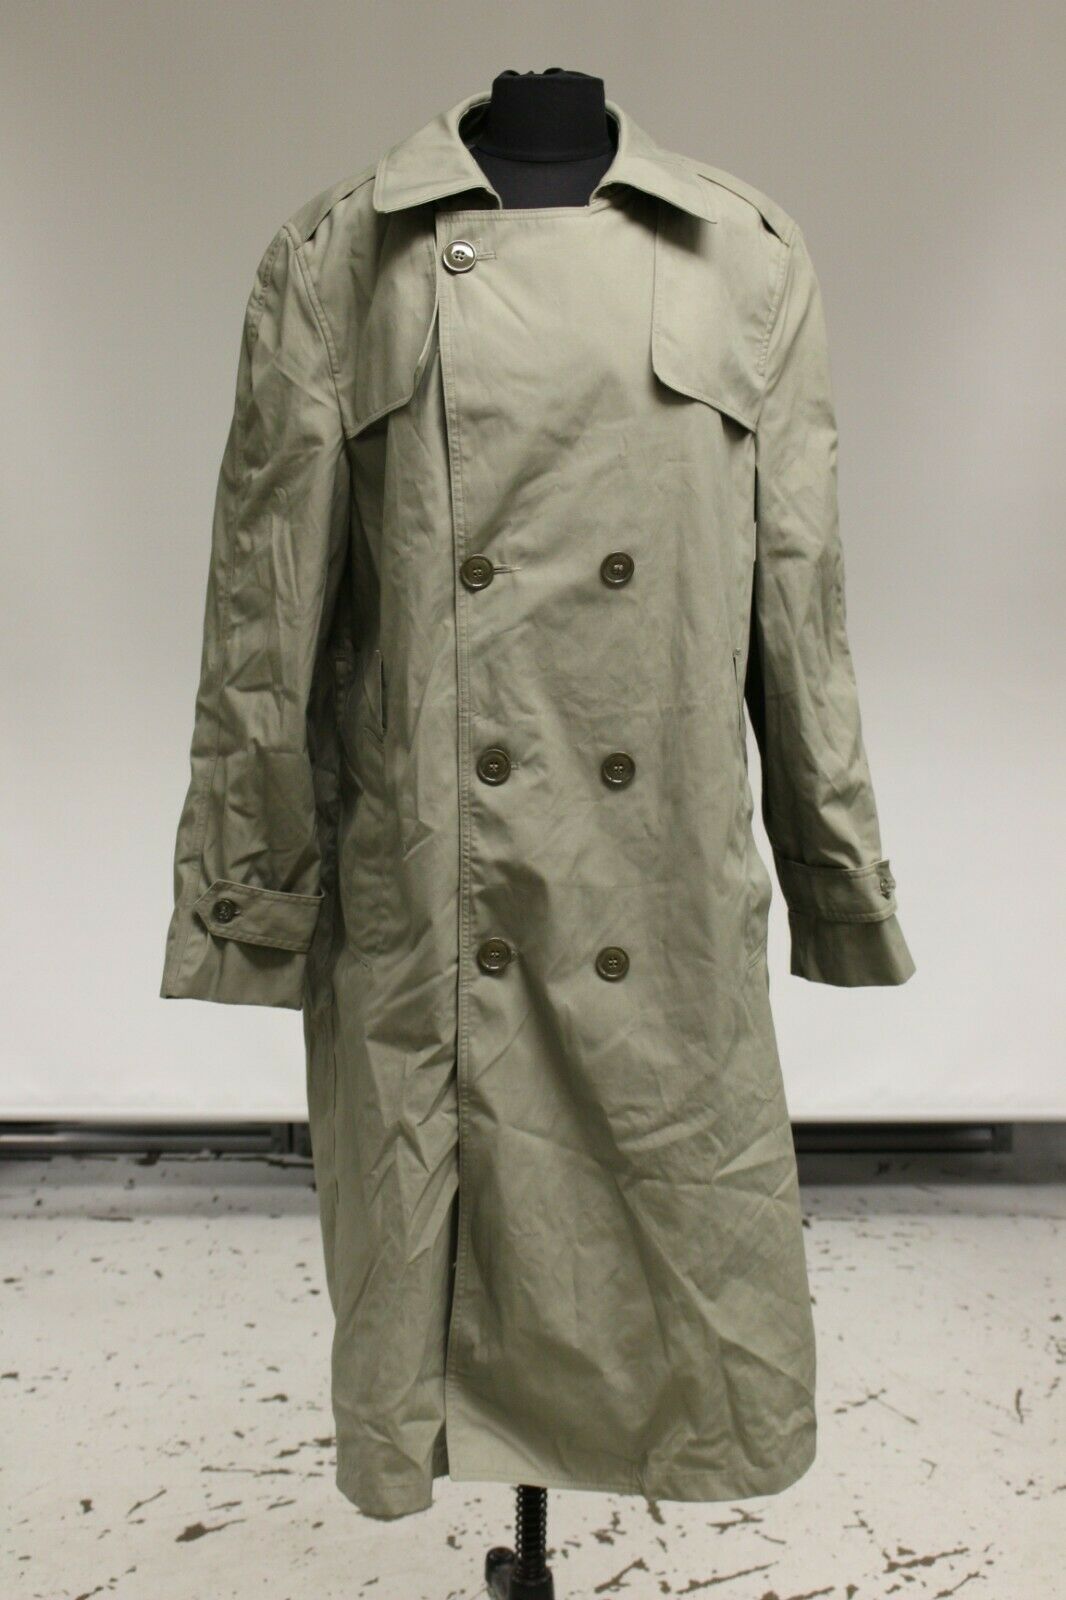 USMC Marine Men's All-Weather Double Breasted Trench Coat With Liner - 44L  -Used